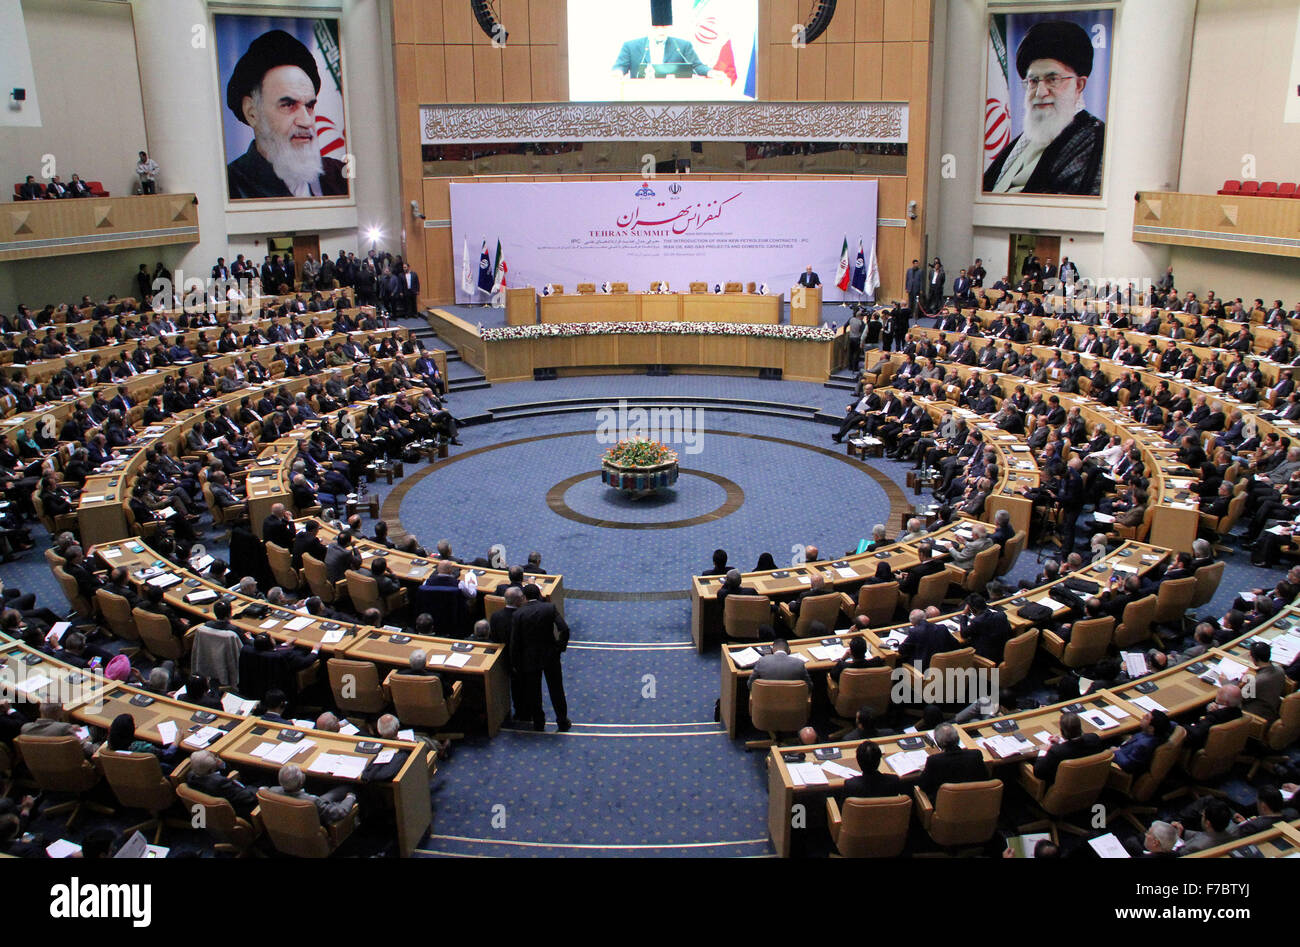 Tehran, Iran. 28th Nov, 2015. Delegations are seen in the Tehran conference in Tehran, capital of Iran, Nov. 28, 2015. Iran's Oil Ministry unveiled a new model of oil contracts here on Saturday to attract foreign investments in oil sector in the post-sanction era. The newly developed model of oil contracts, dubbed as Iran Petroleum Contract (IPC), are designed to help the country attract finance from Asian and European investors, Iranian Oil Minister Bijan Namdar Zanganeh said in a conference. Credit:  Ahmad Halabisaz/Xinhua/Alamy Live News Stock Photo